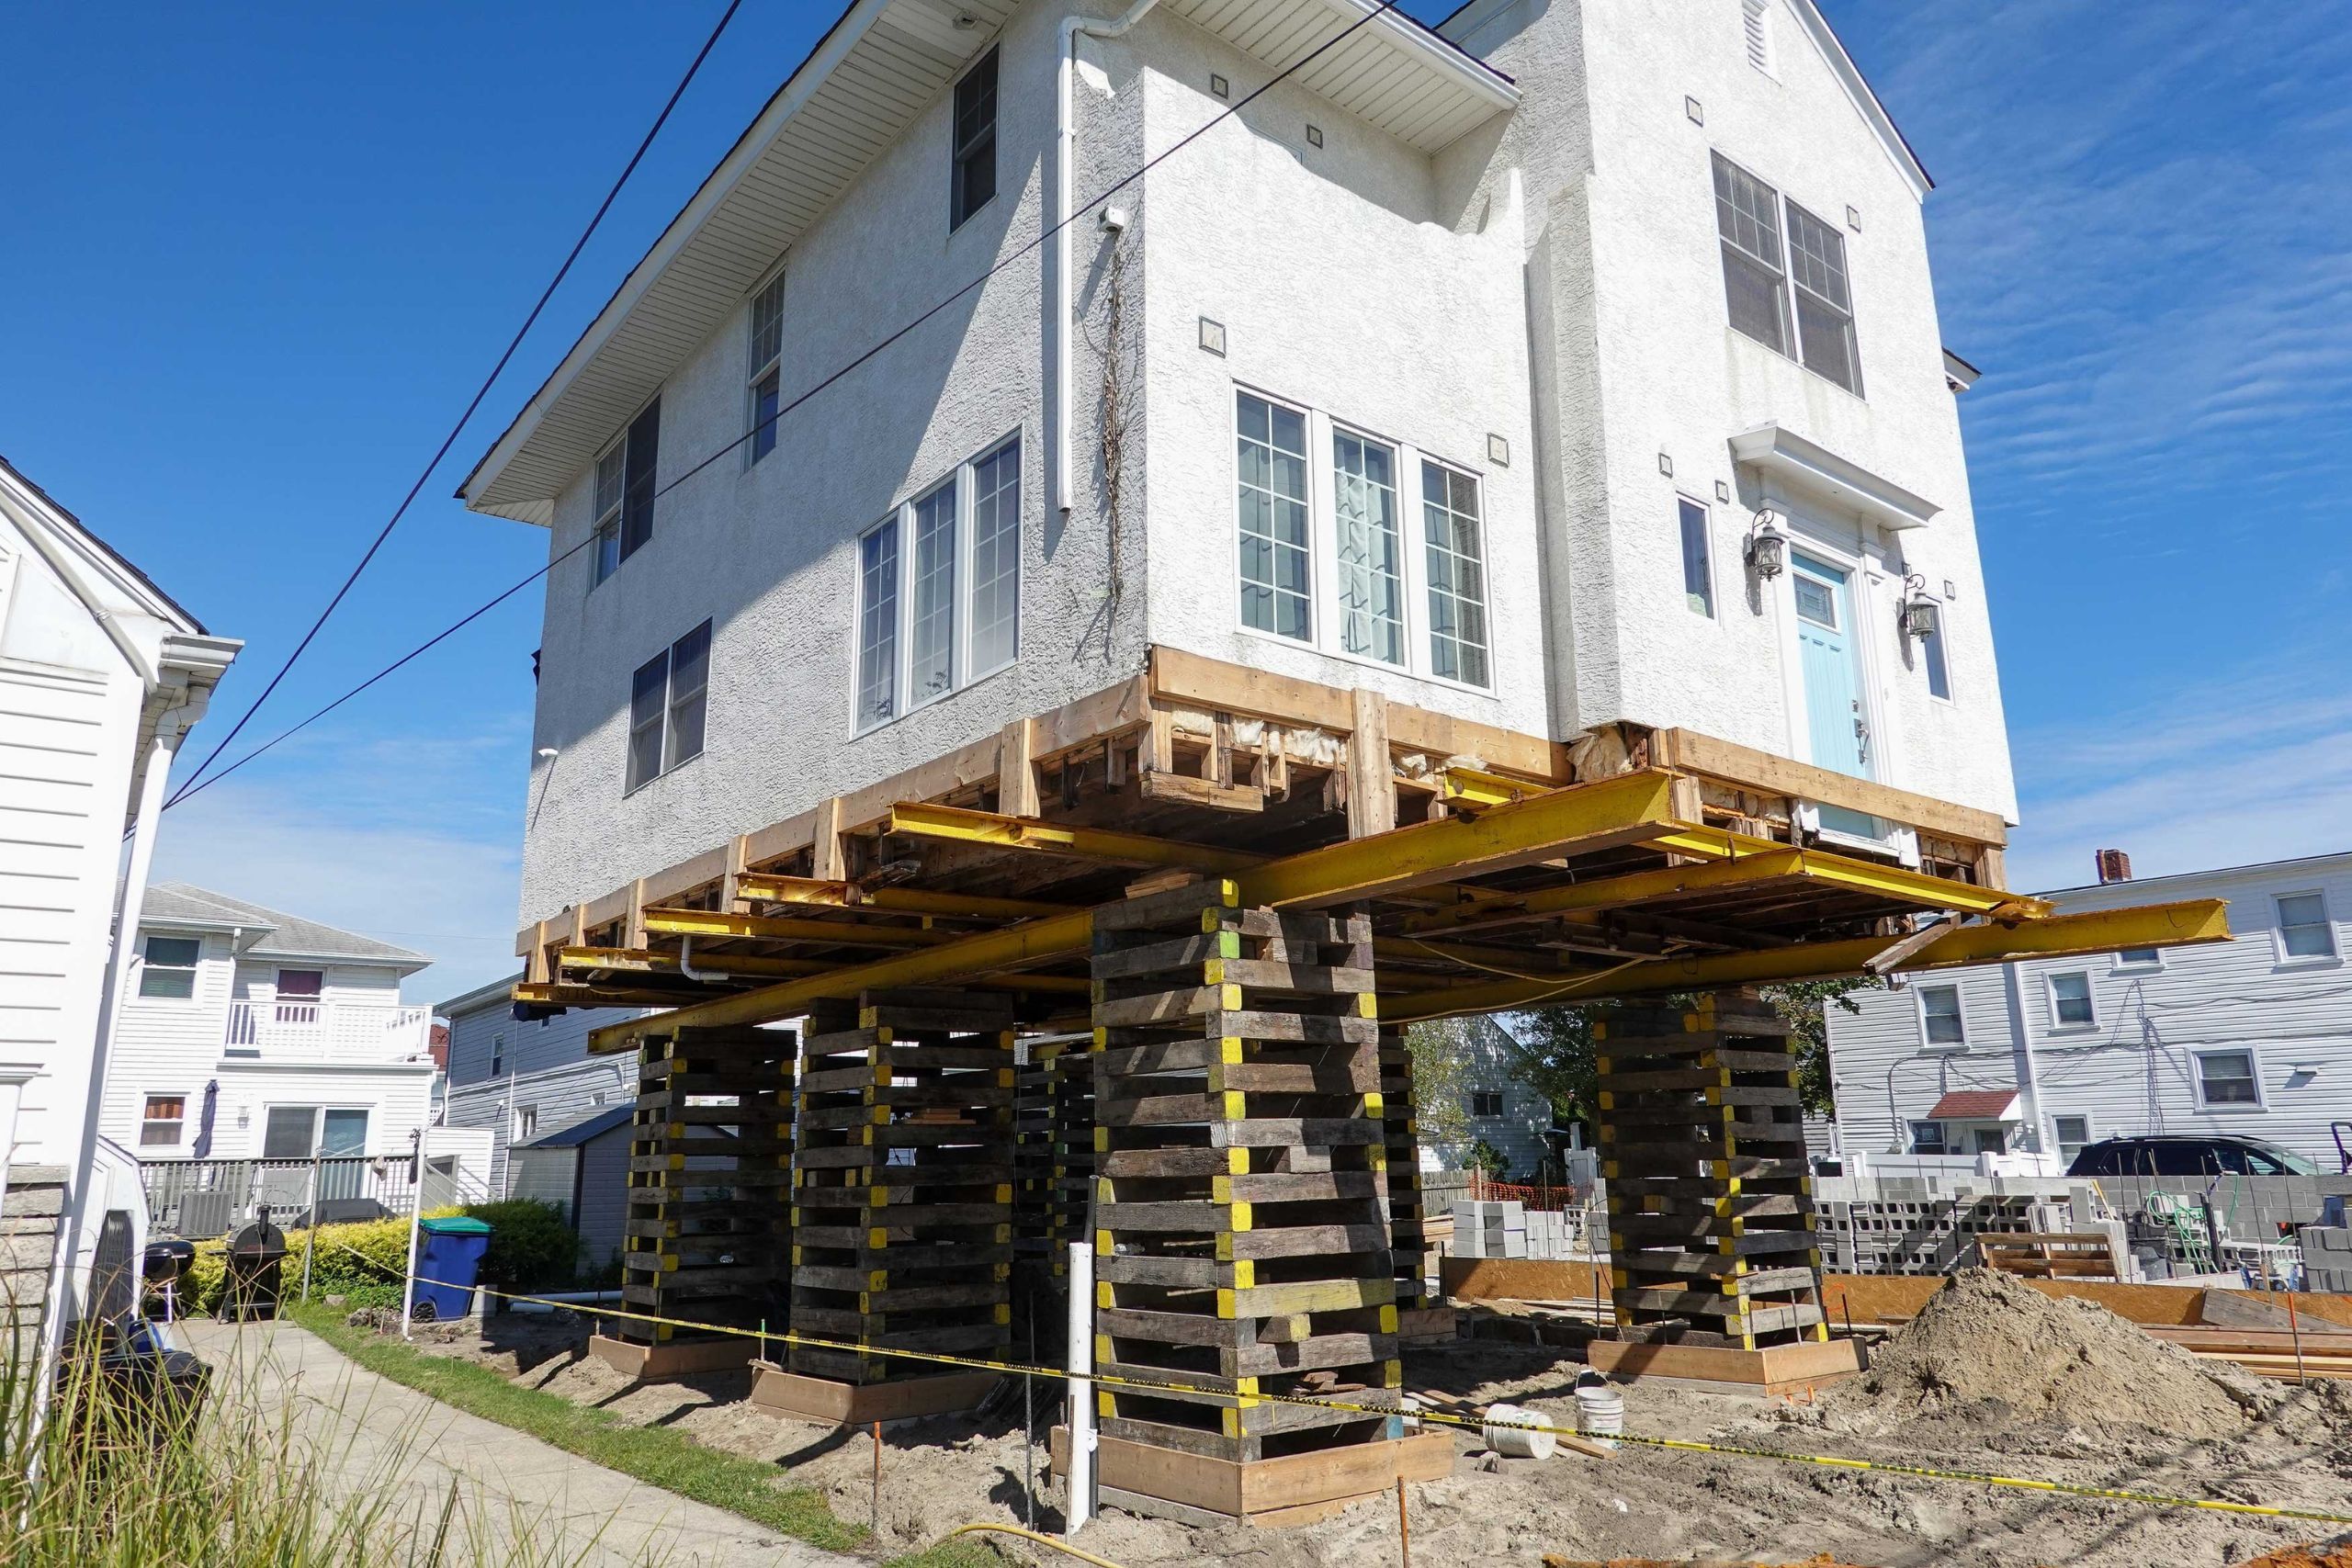 Located in Hyattsville, Maryland, we are a company that specializes in house lifting, small distance house moving, piles and foundations.